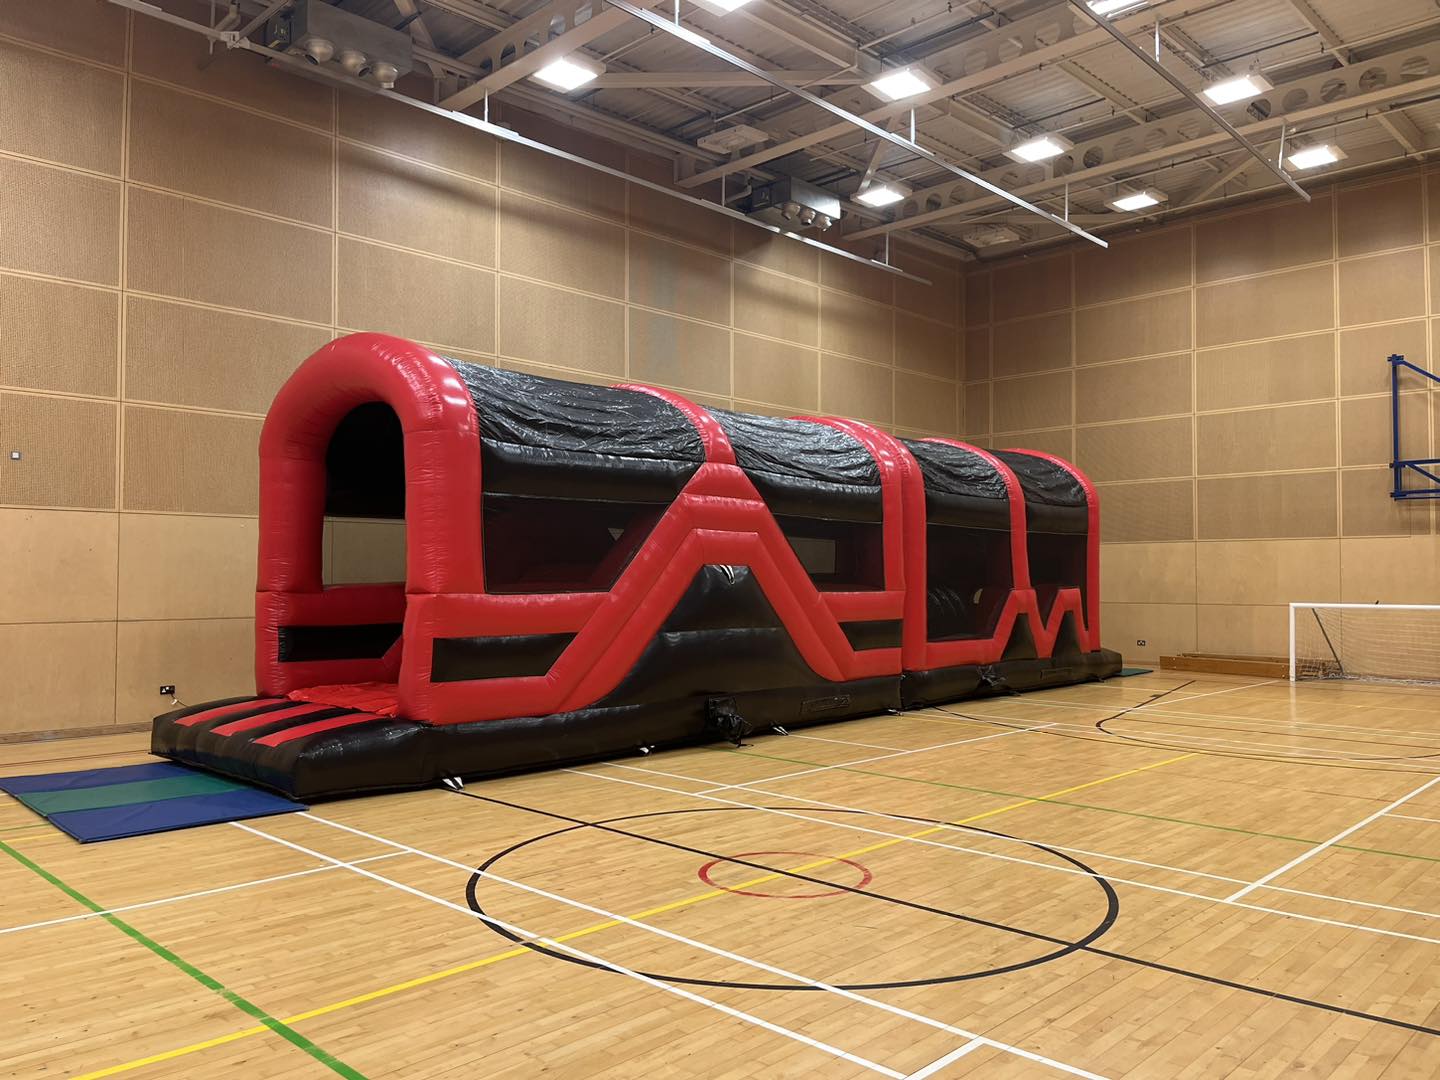 Inflatable obstacle course set up in a school hall due to inclement weather